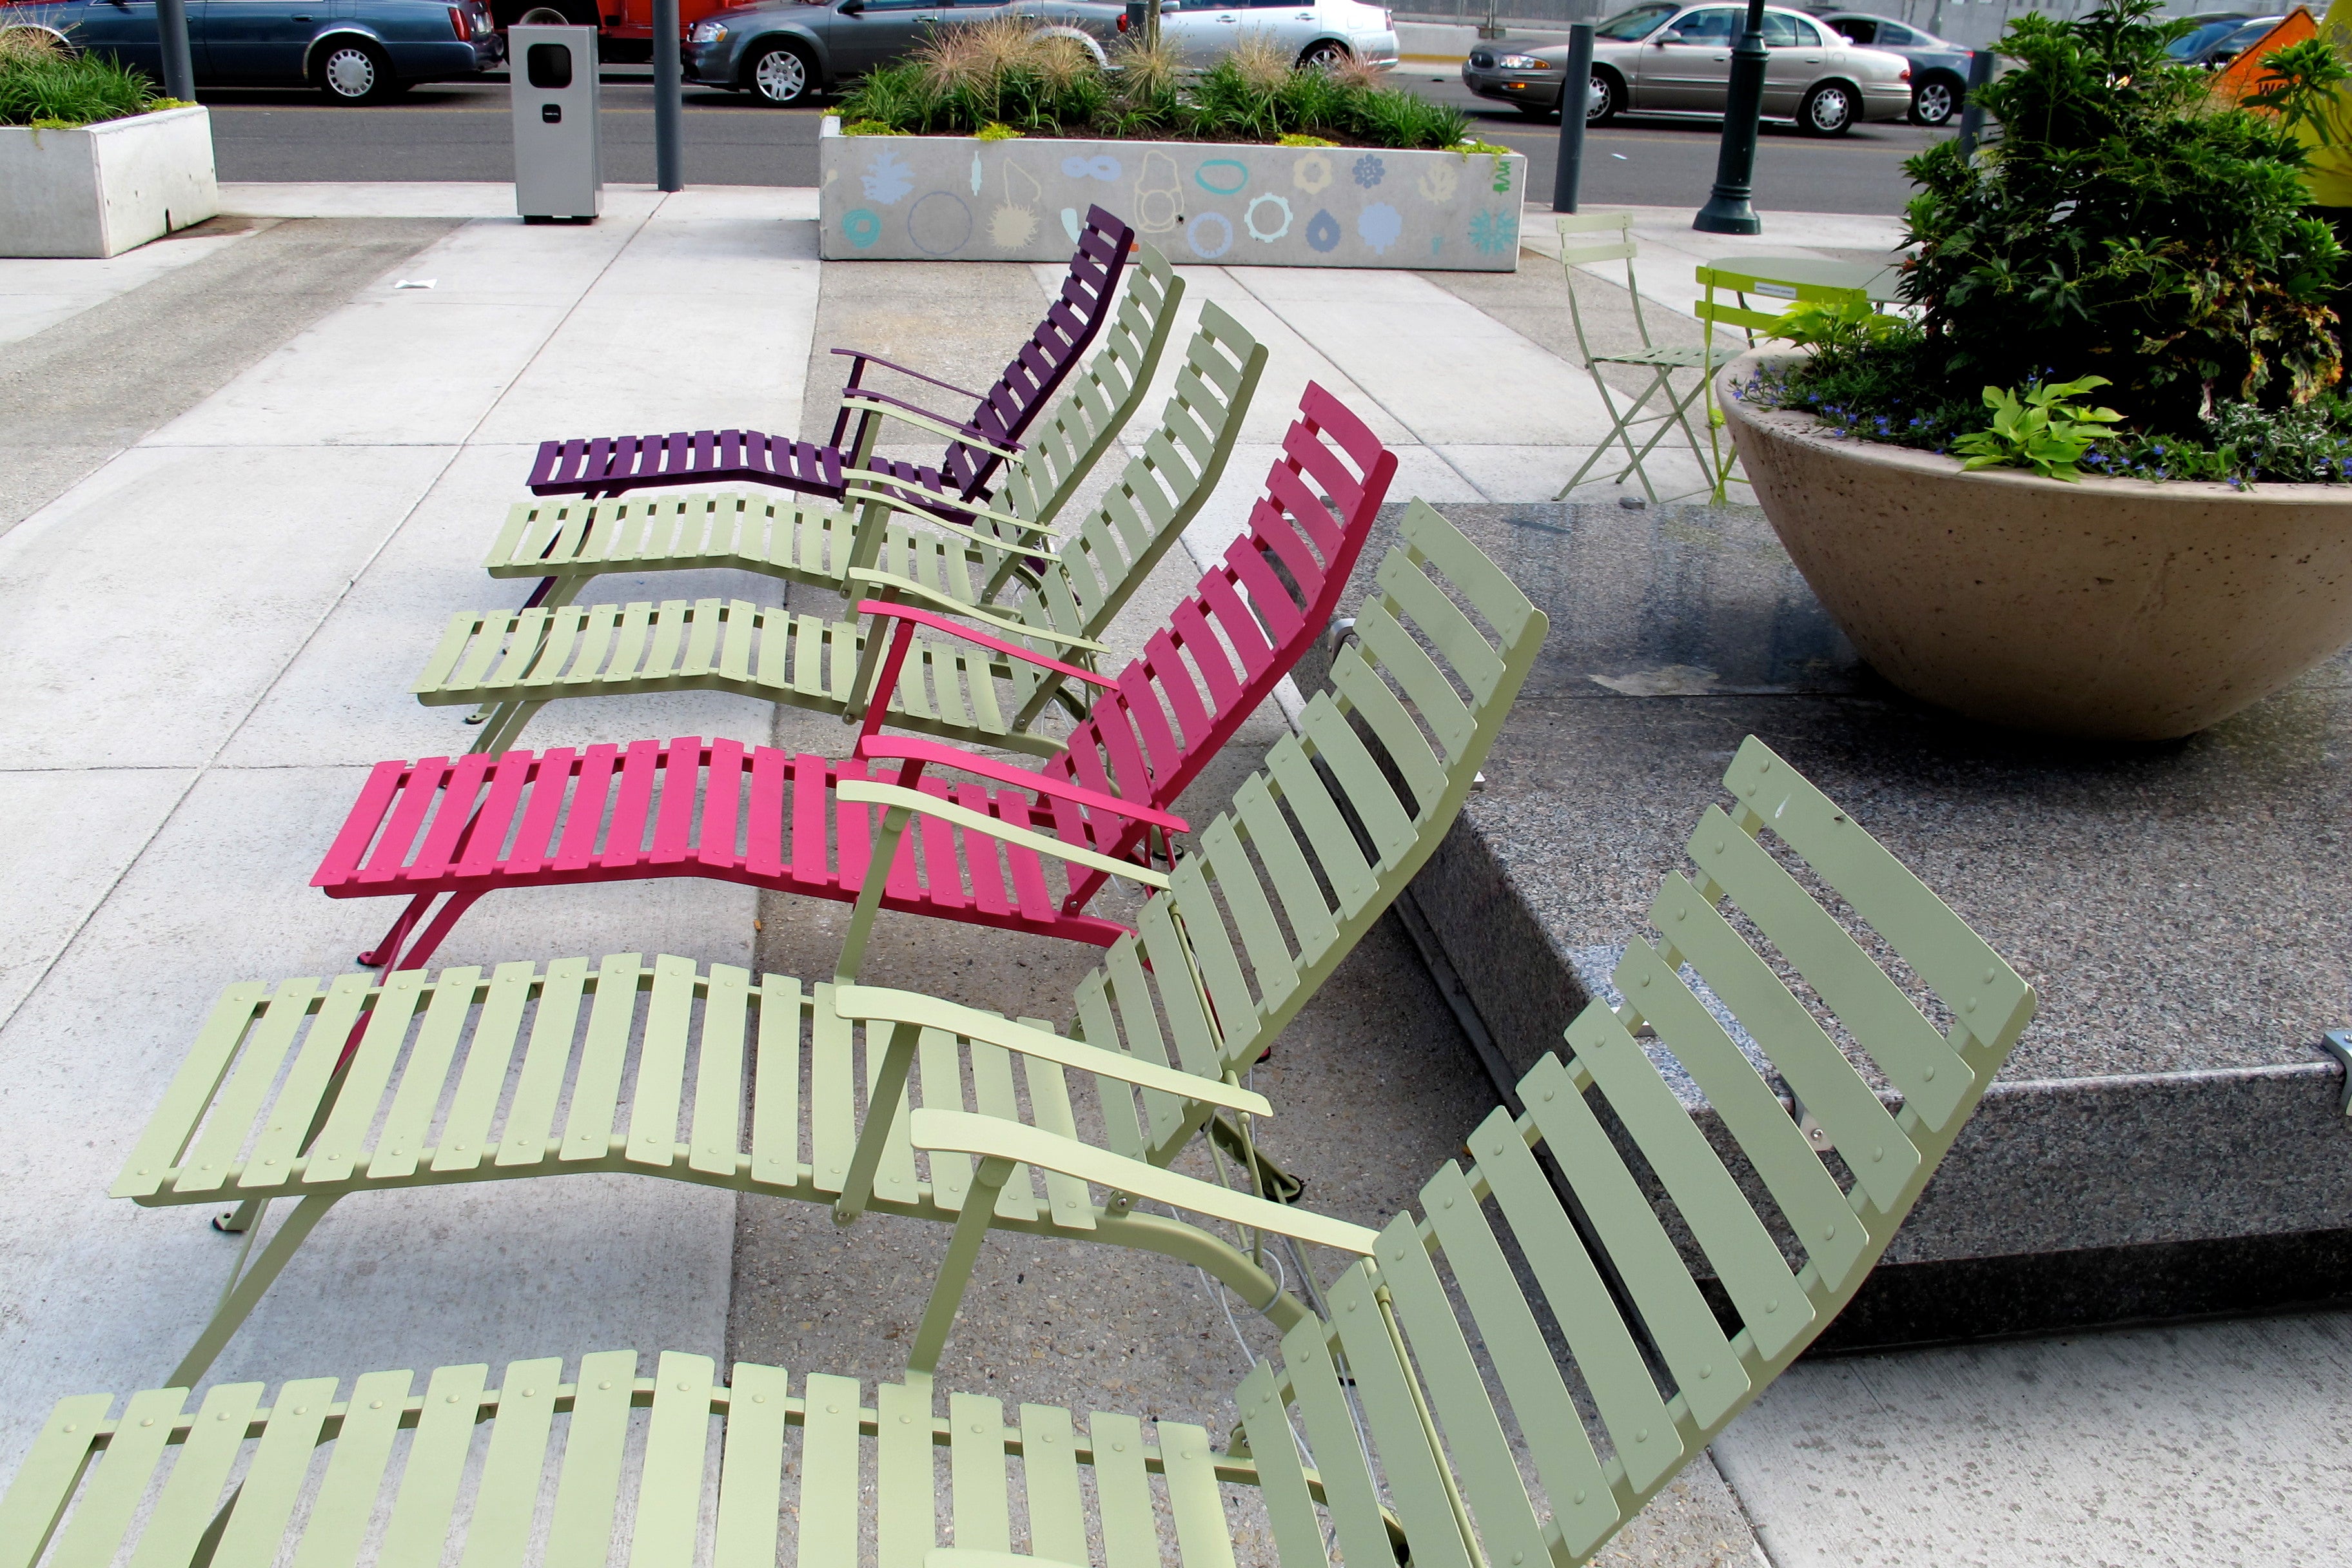 The Porch lounge chairs